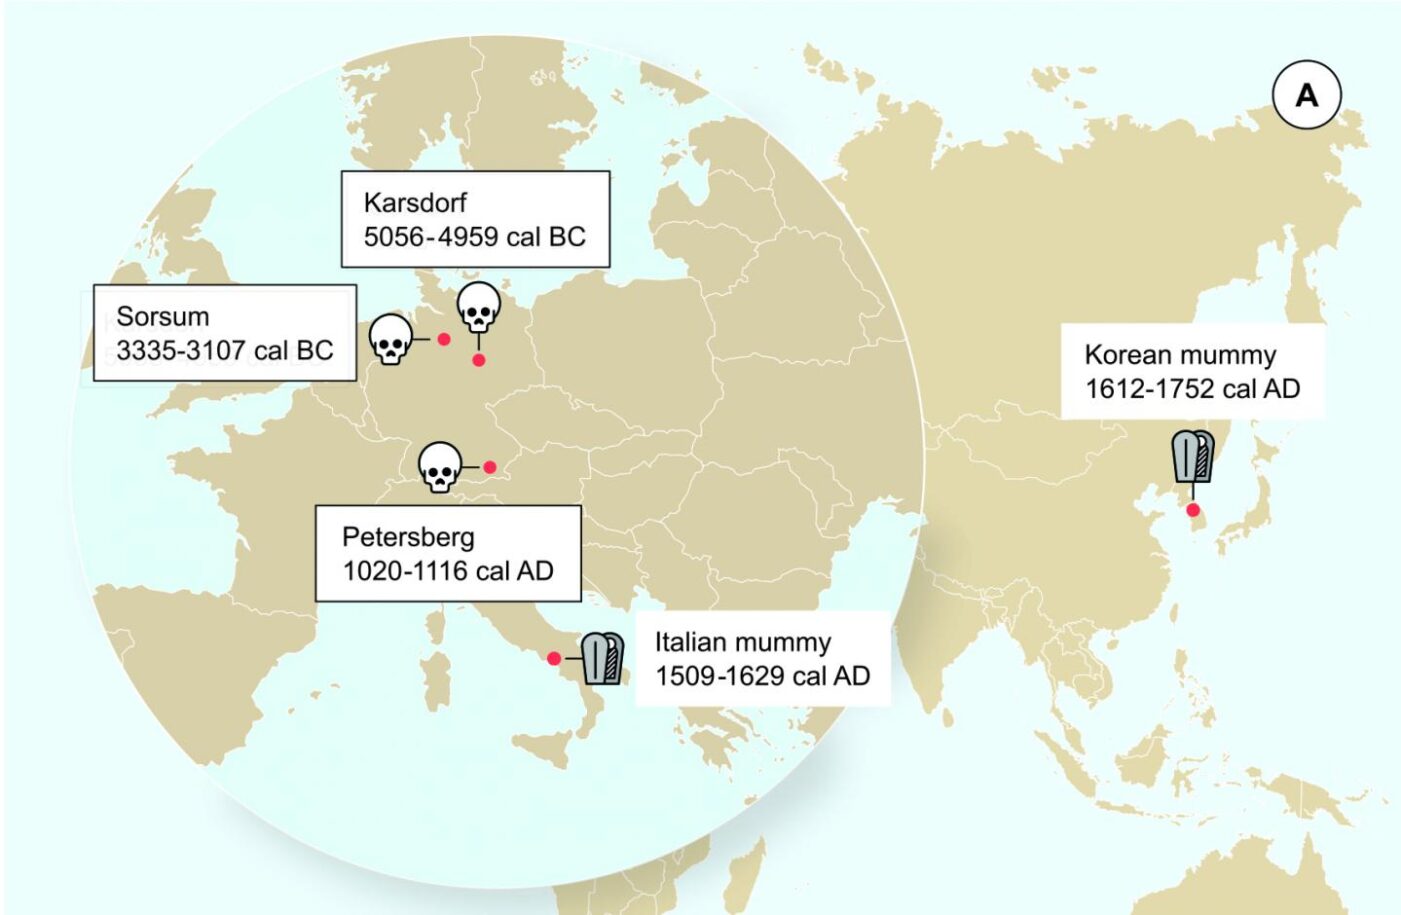 Geographic location of the samples from which ancient HBV genomes were recovered. Icons indicate the sample material (tooth or mummy). HBV genomes obtained in this study are indicated by black frames. [Krause-Kyora et al., eLife 2018]